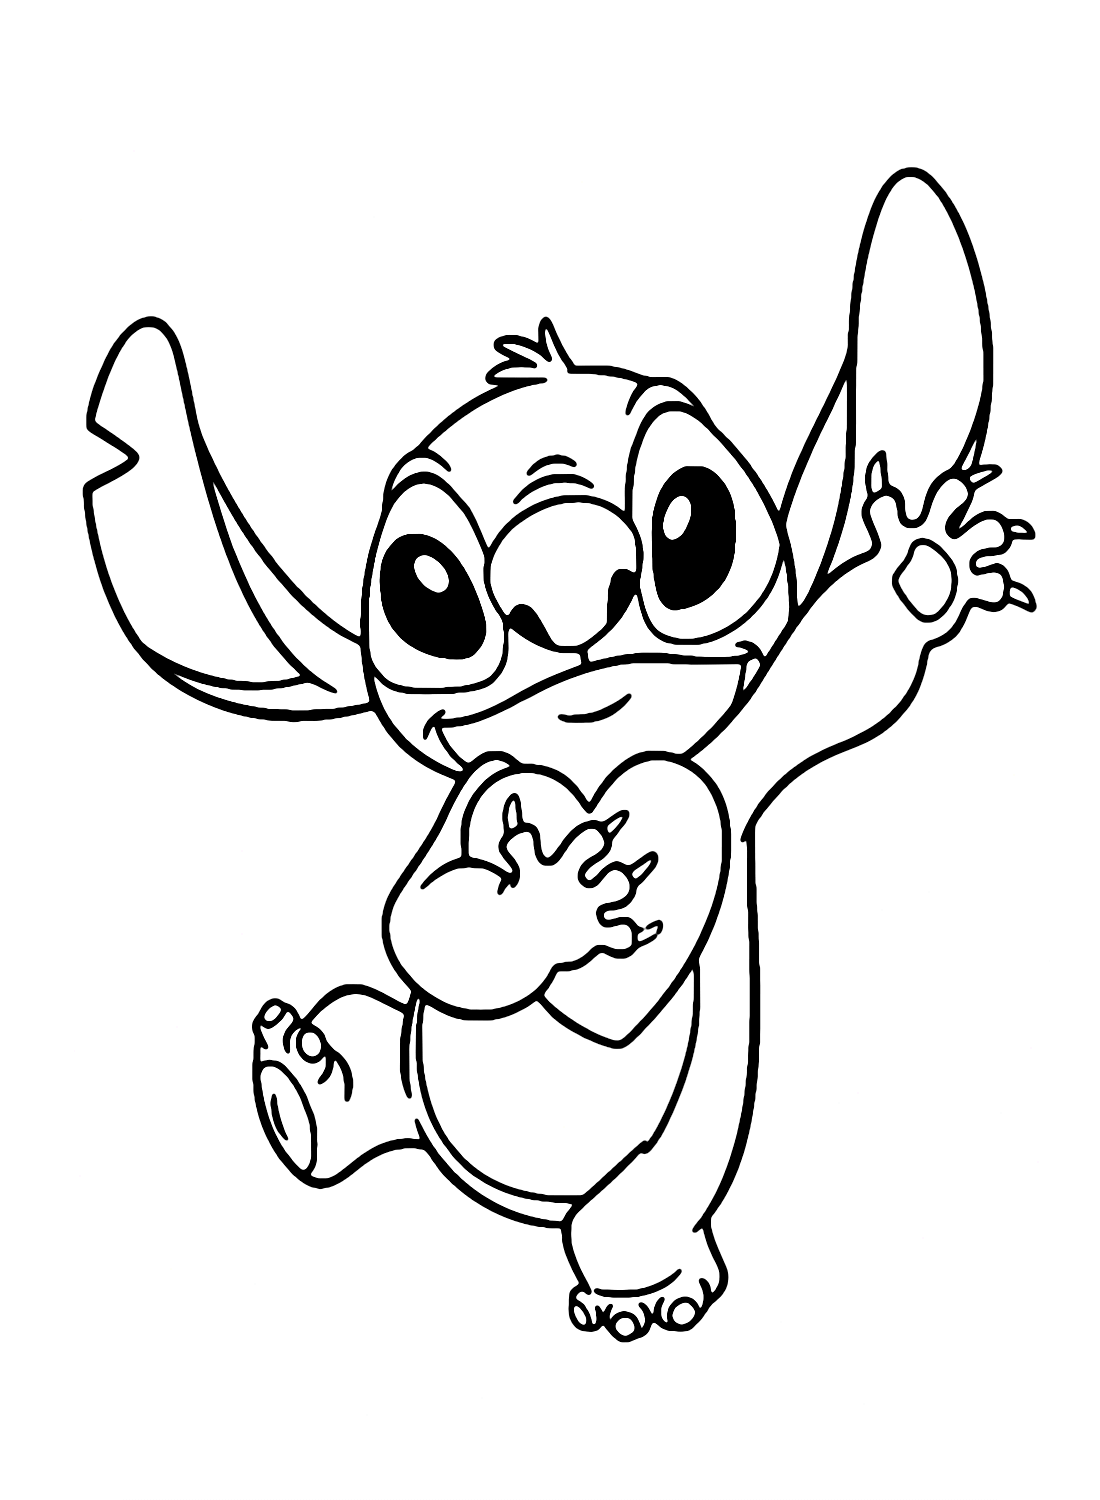 Coloring Pages Stitch Coloring Page